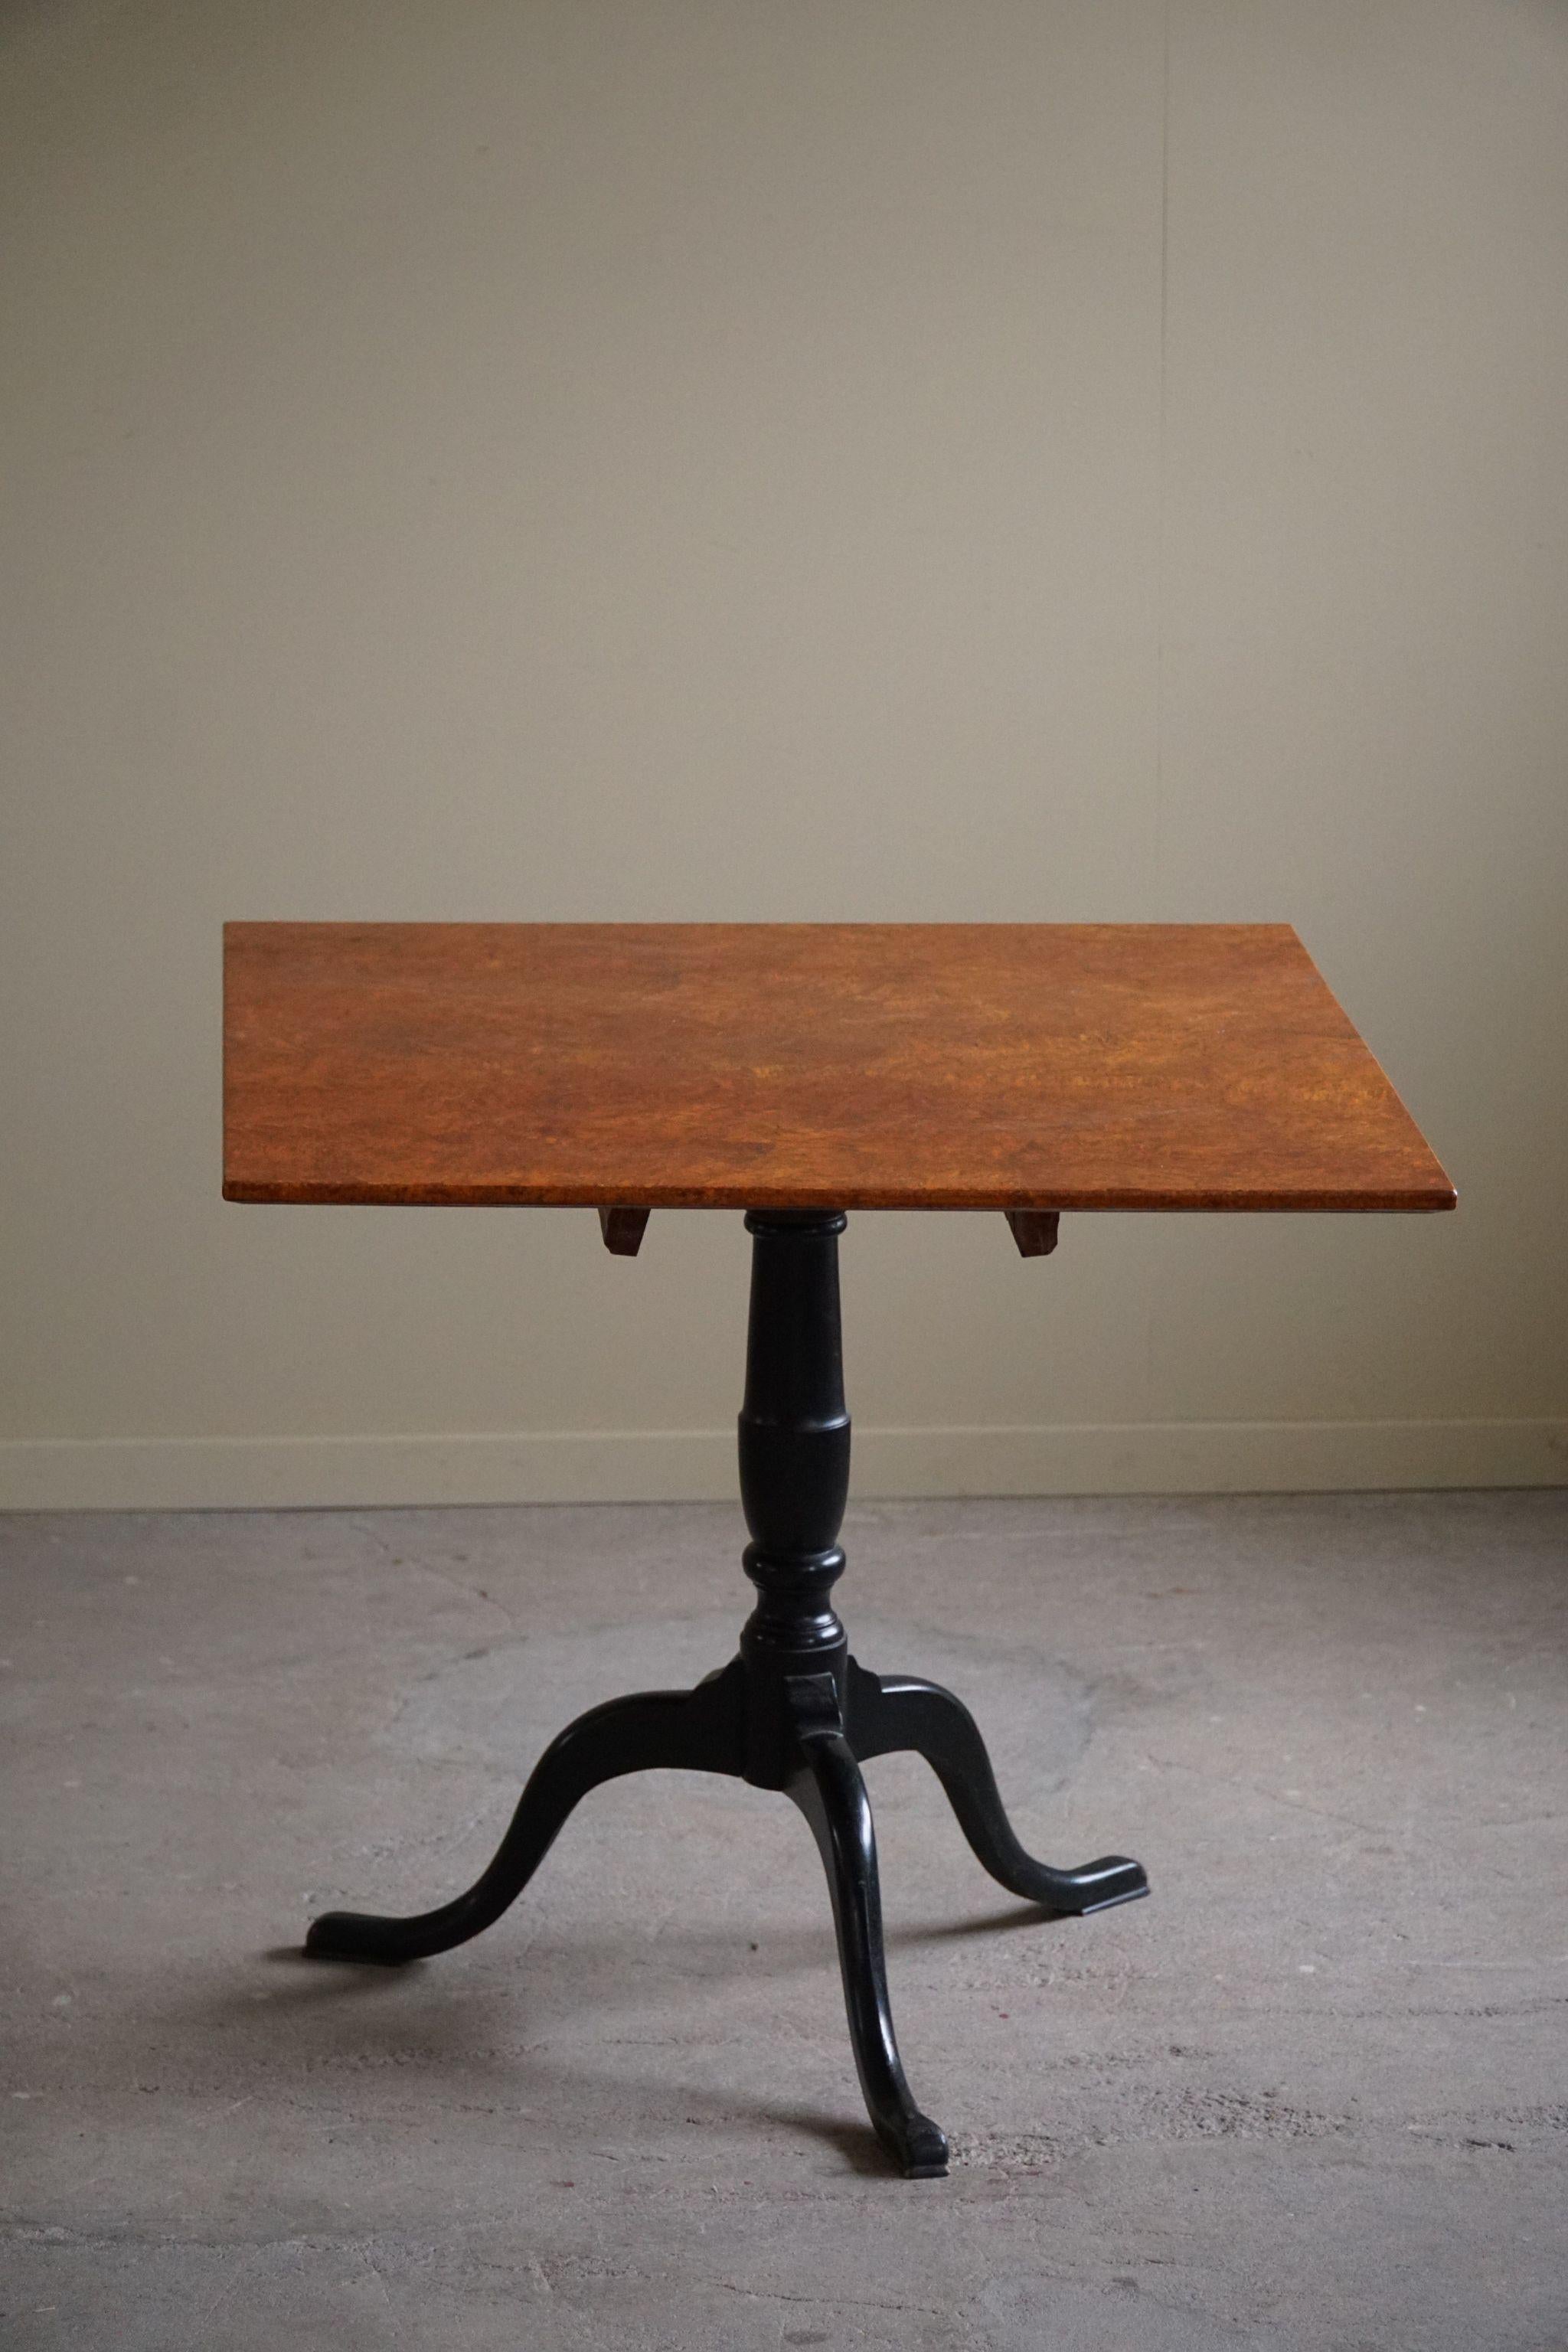 Handcrafted Square Antique Drop Leaf Table in Burl Wood, Swedish, 19th Century For Sale 1